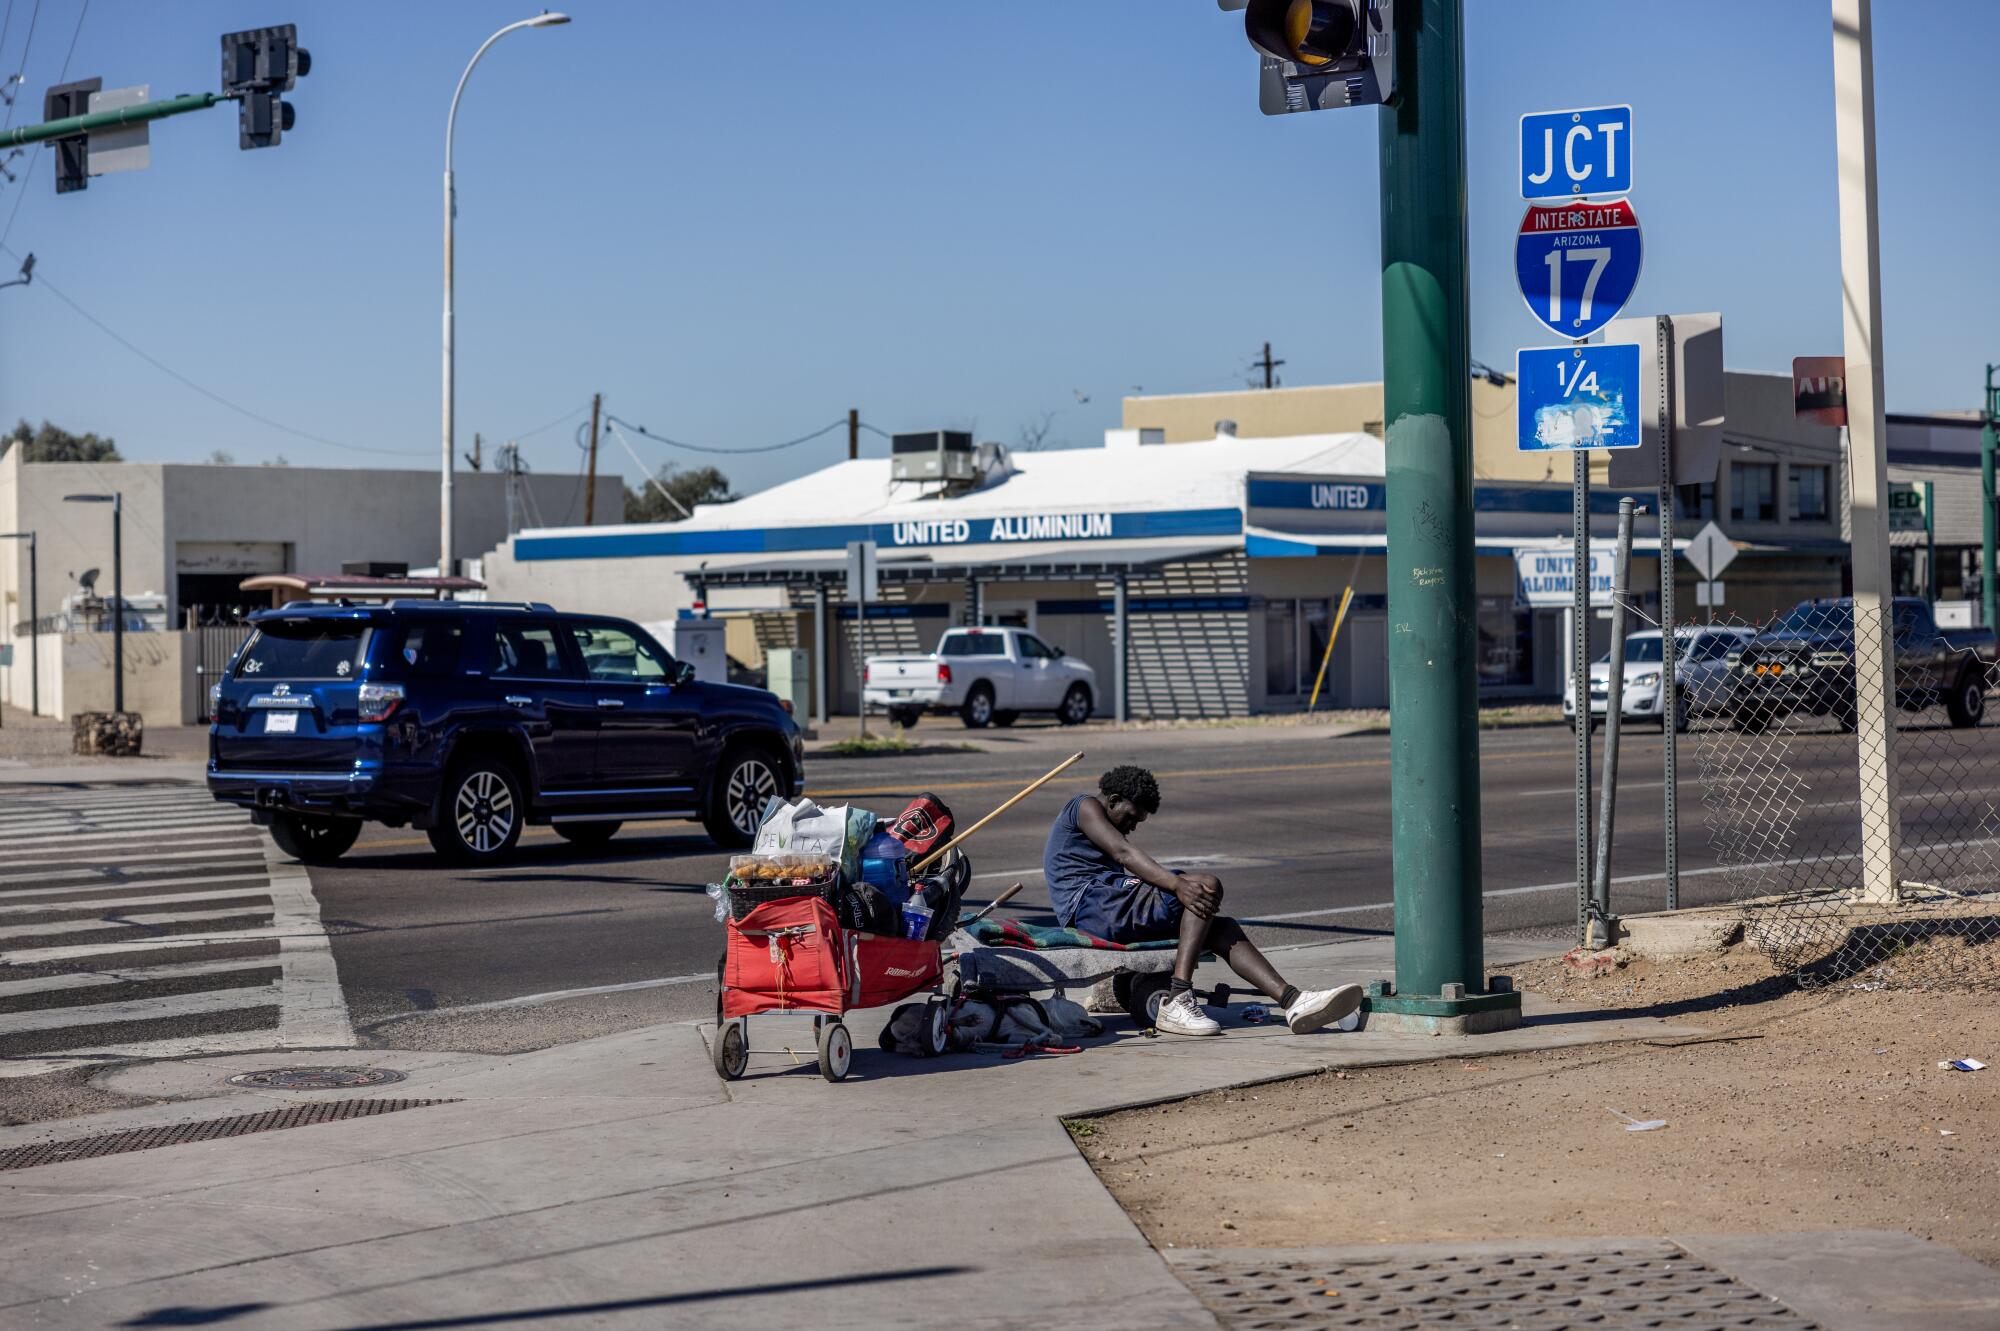 A man with a red cart sitting at an intersection near a freeway sign reading "JCT 17"